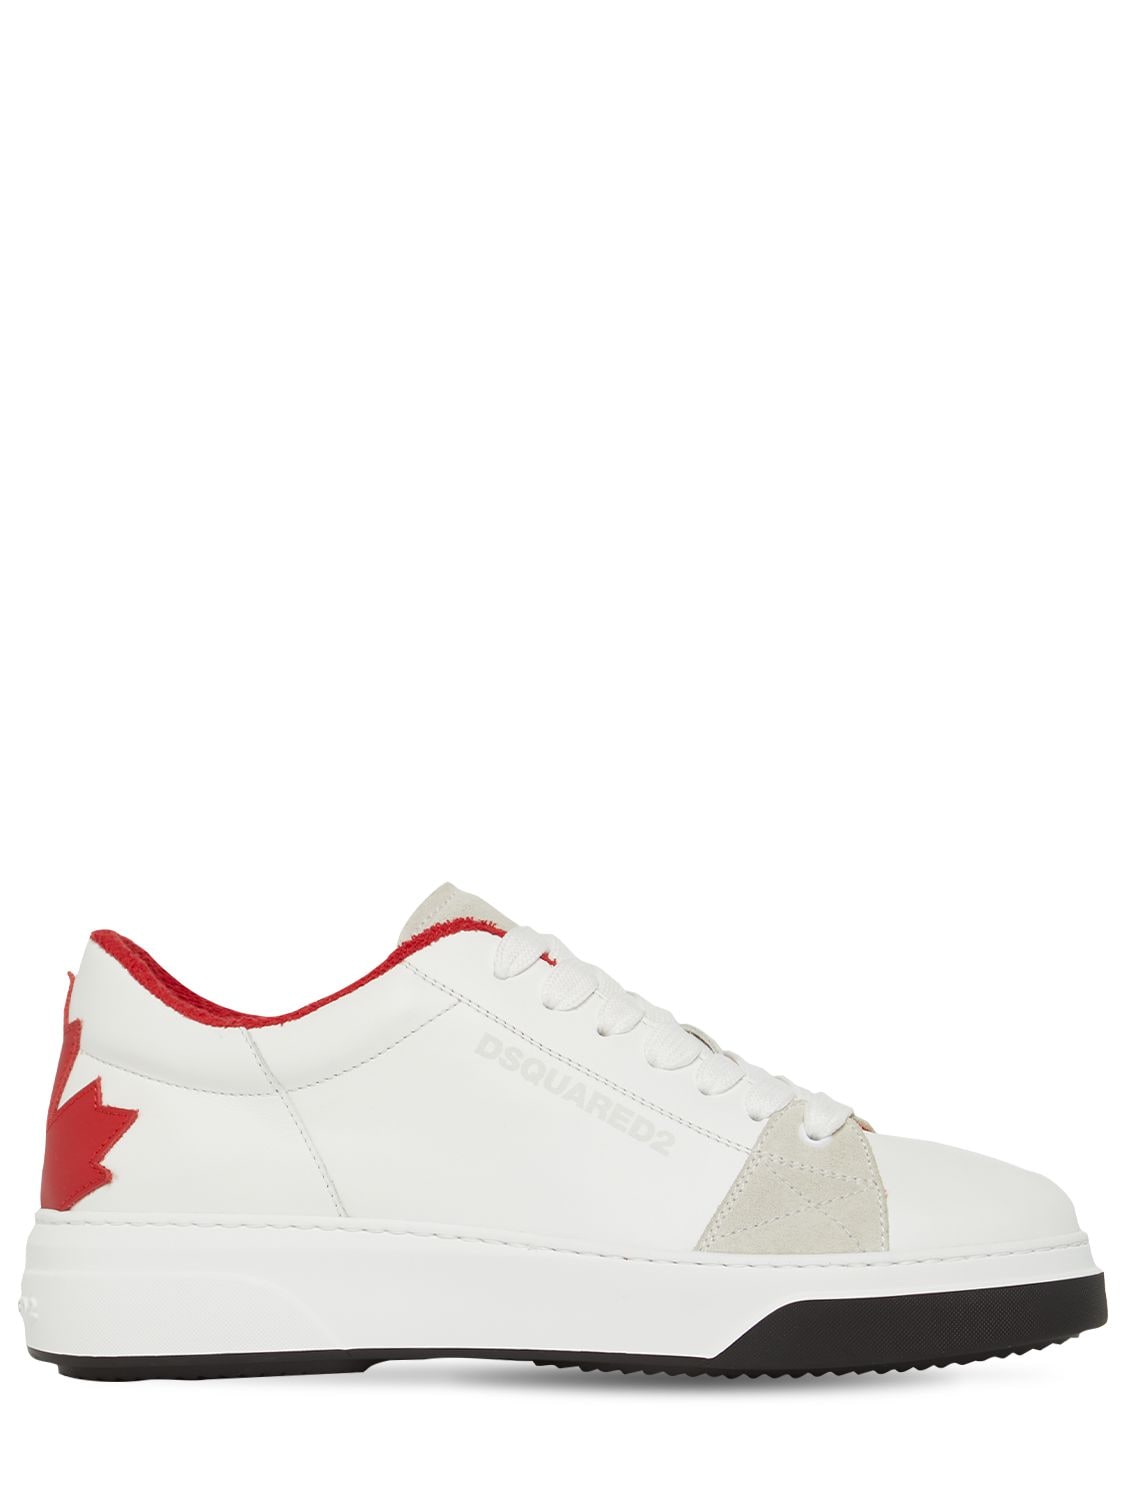 Leaf Bumper Leather Sneakers